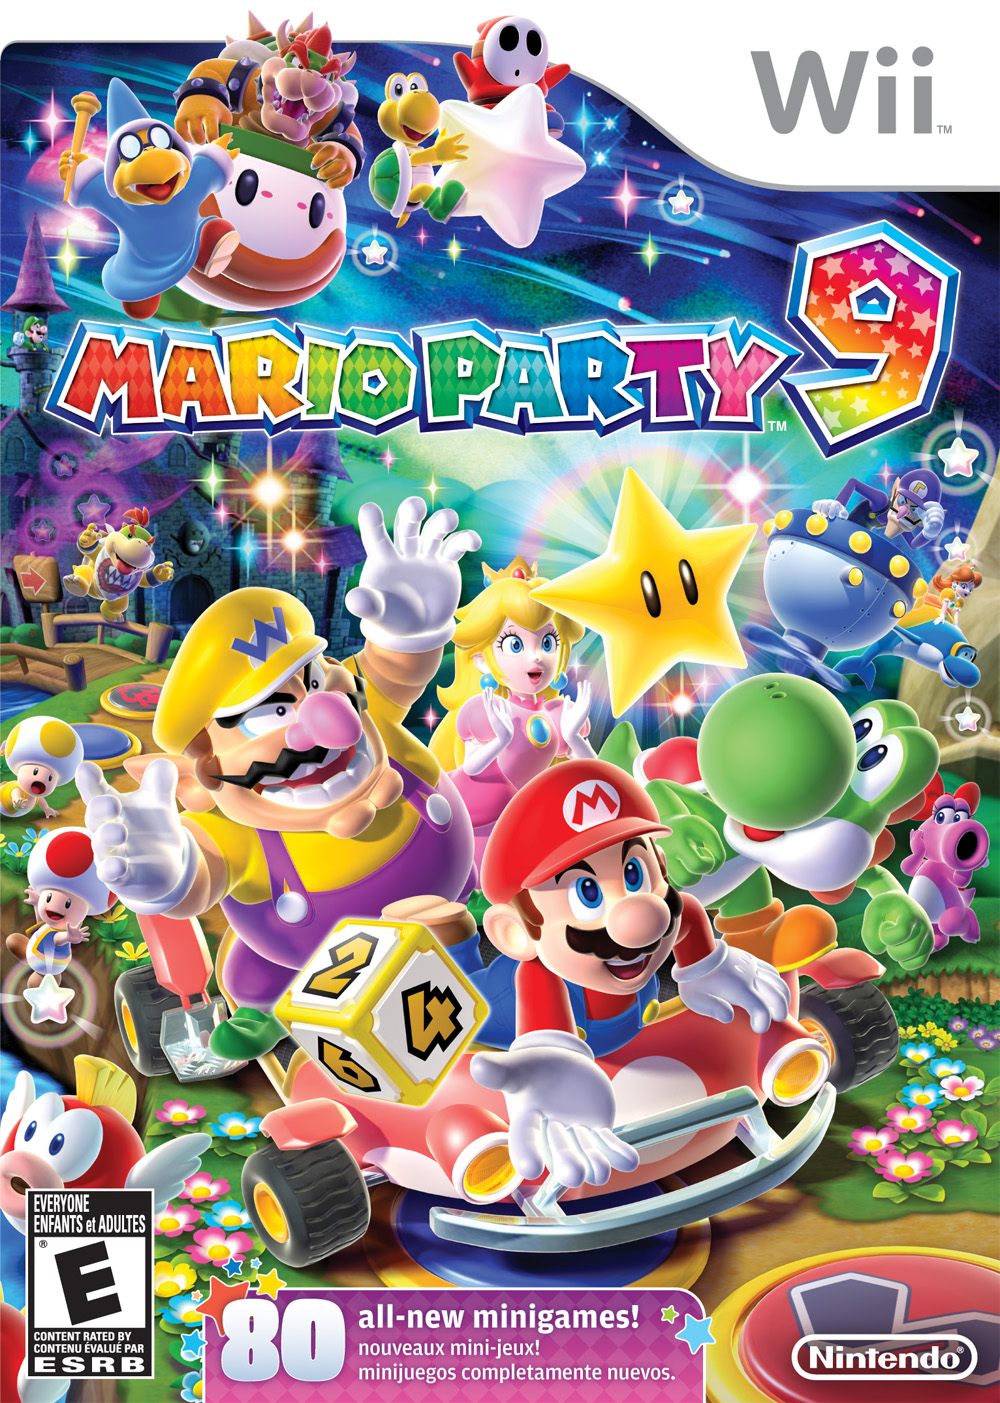 Playing 'Super Mario Party' alone makes me feel sad